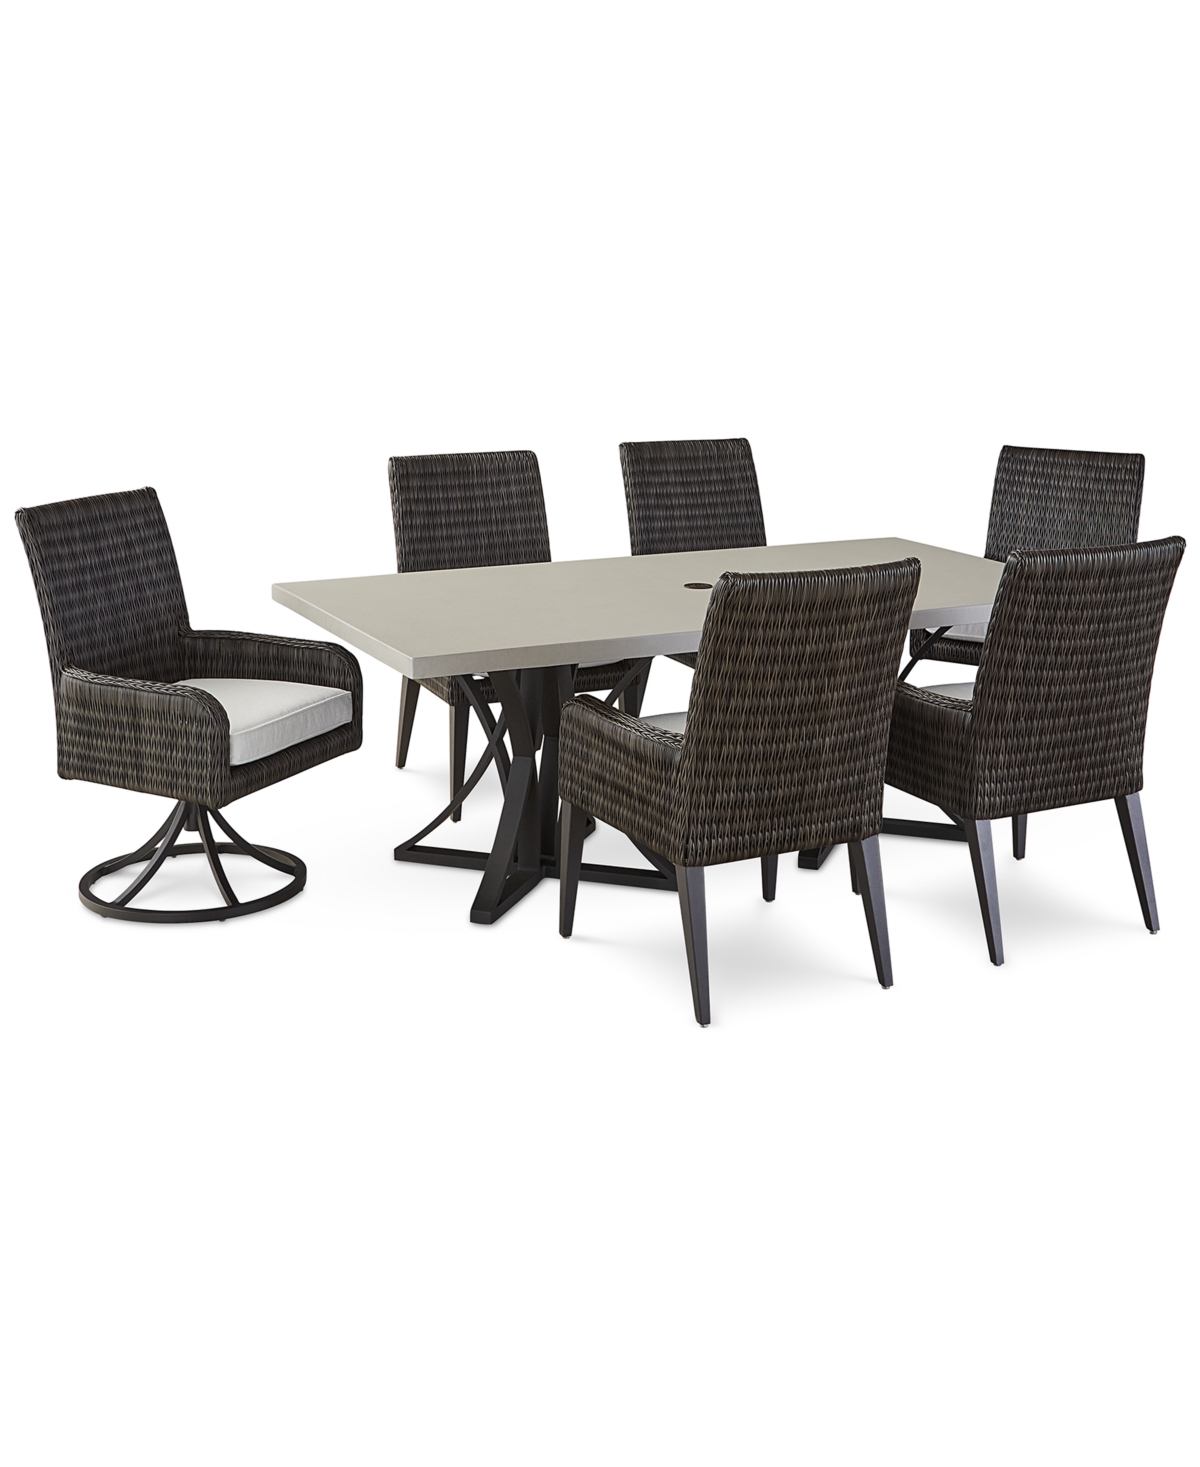 Tommy Bahama Cypress Point 7-pc. Outdoor Dining Set (rectangle Table, 4 Dining Chairs, 2 Swivel Rocker Chairs) In Charcoal Taupe